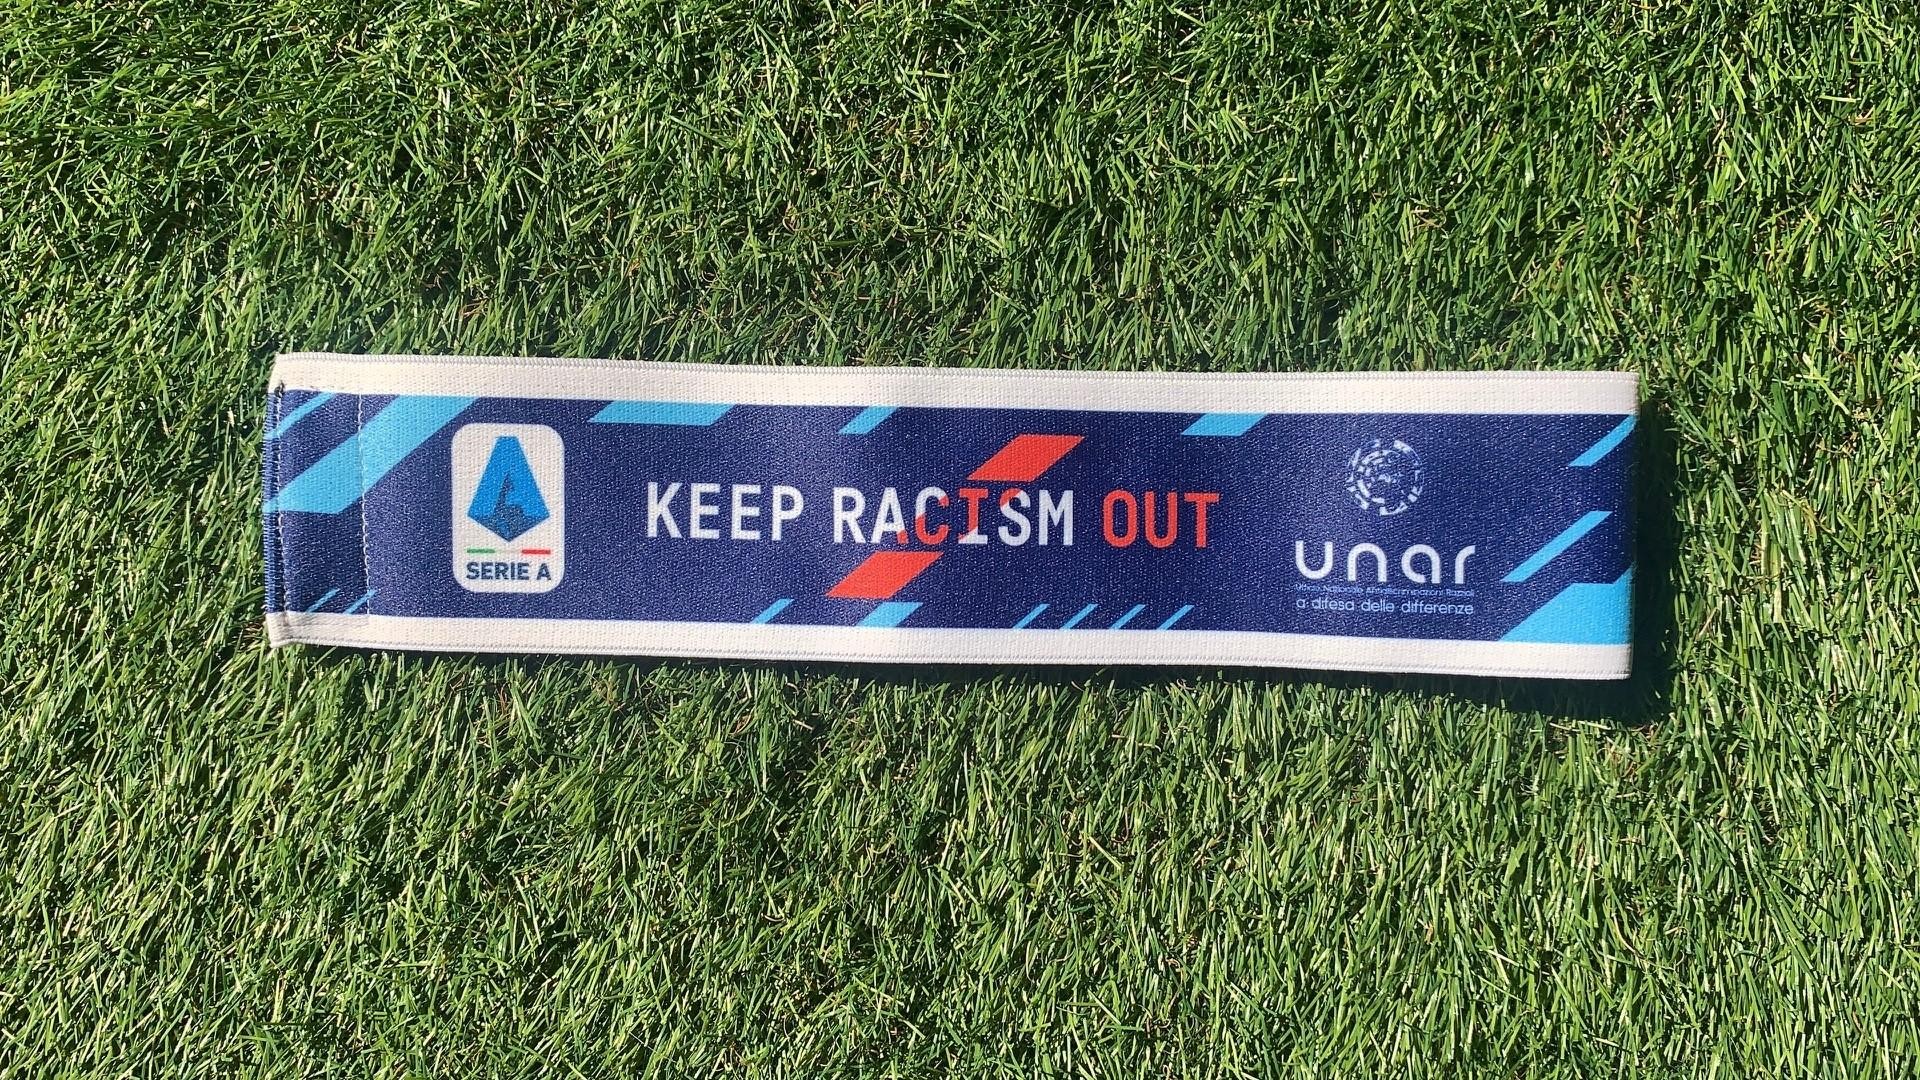 LEGA SERIE A AND UNAR TOGETHER TO “KEEP RACISM OUT”